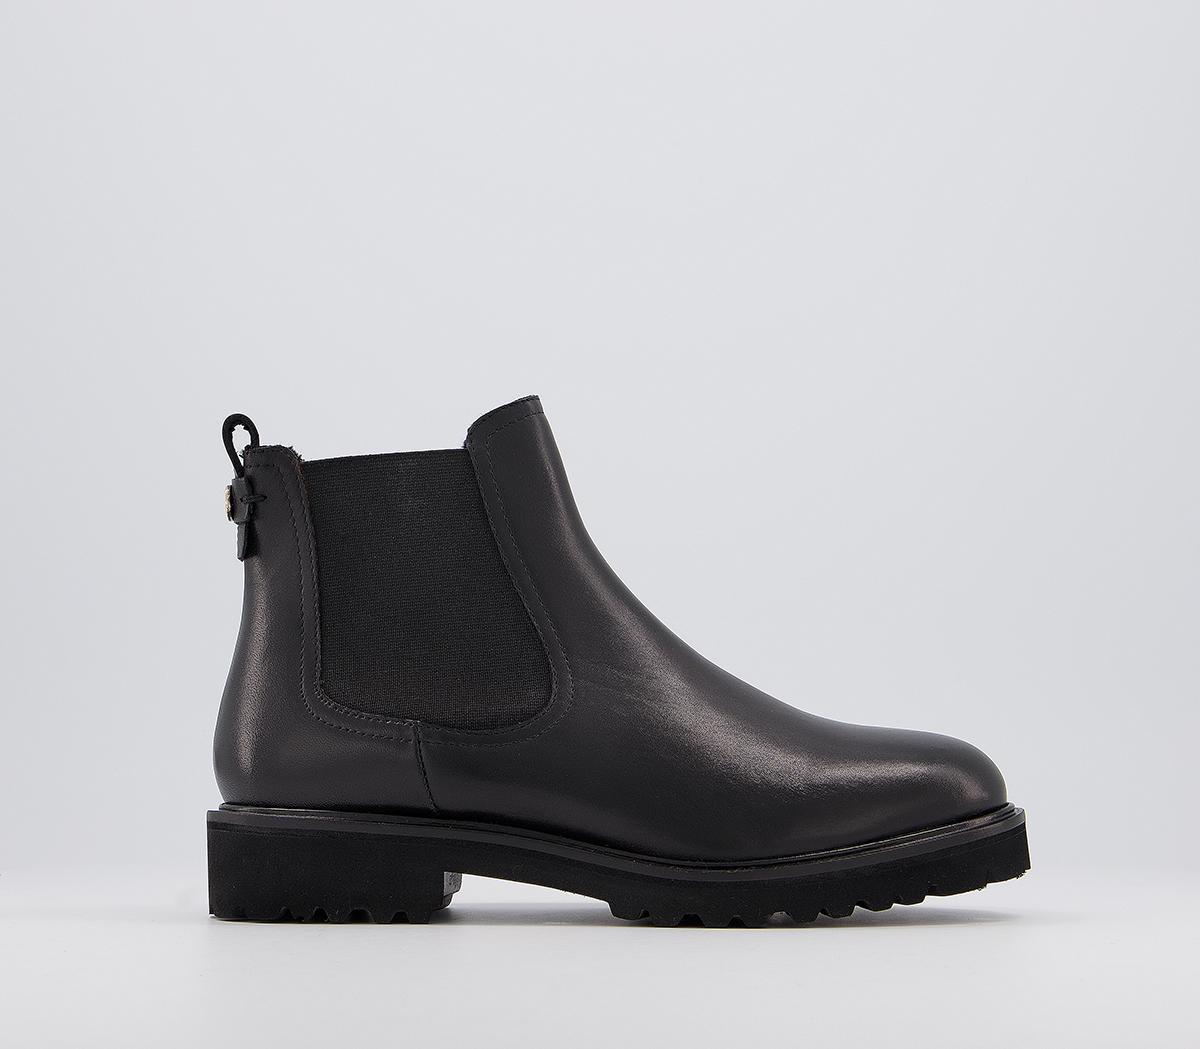 OFFICE Artful Feminine Chelsea Boots Black Leather With Fur Lining ...